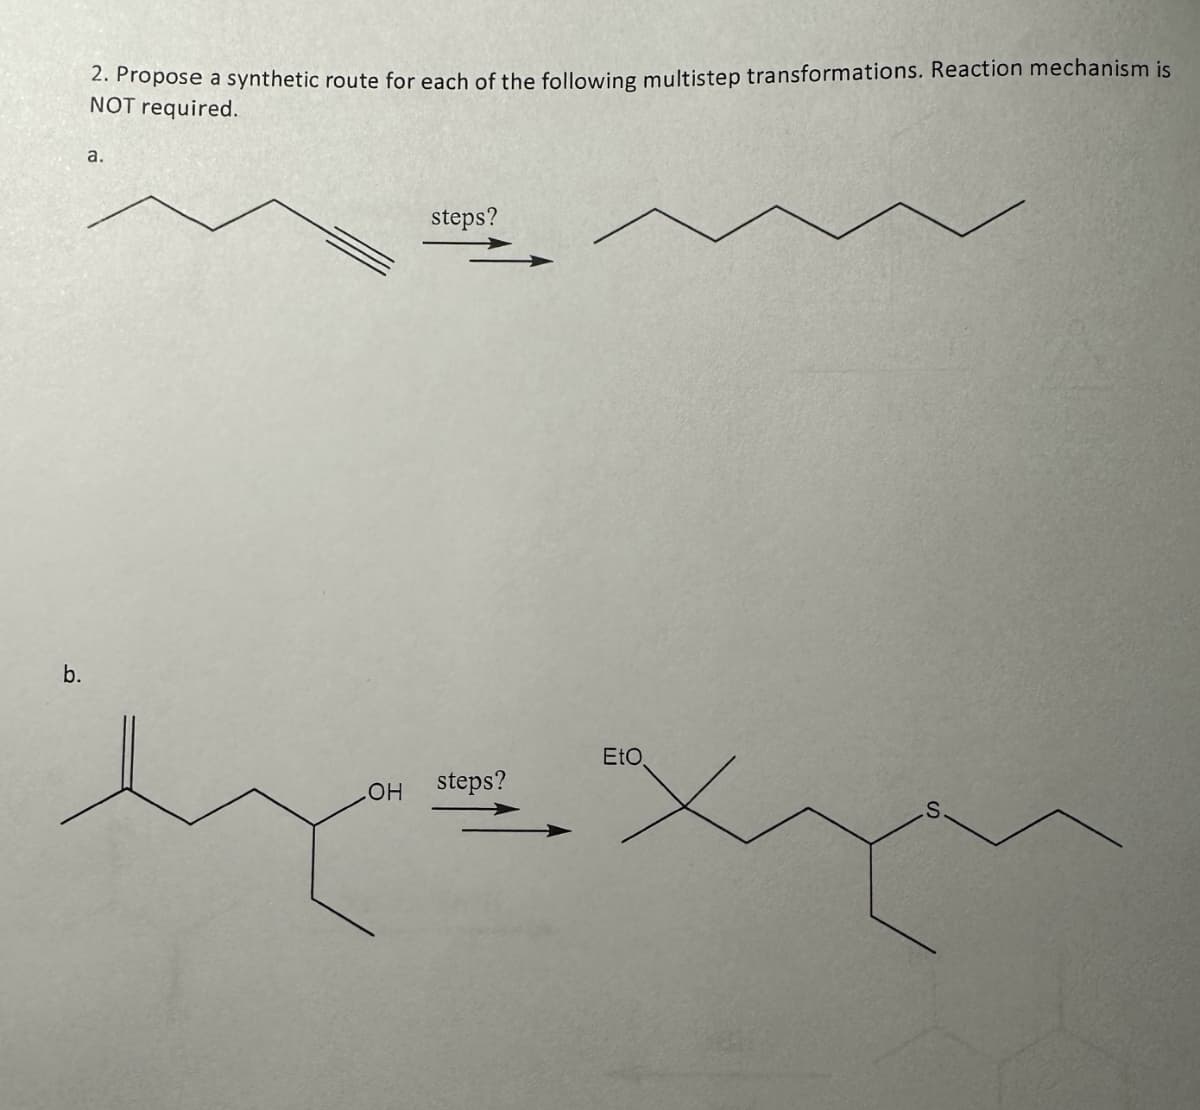 b.
2. Propose a synthetic route for each of the following multistep transformations. Reaction mechanism is
NOT required.
a.
steps?
OH steps?
EtO